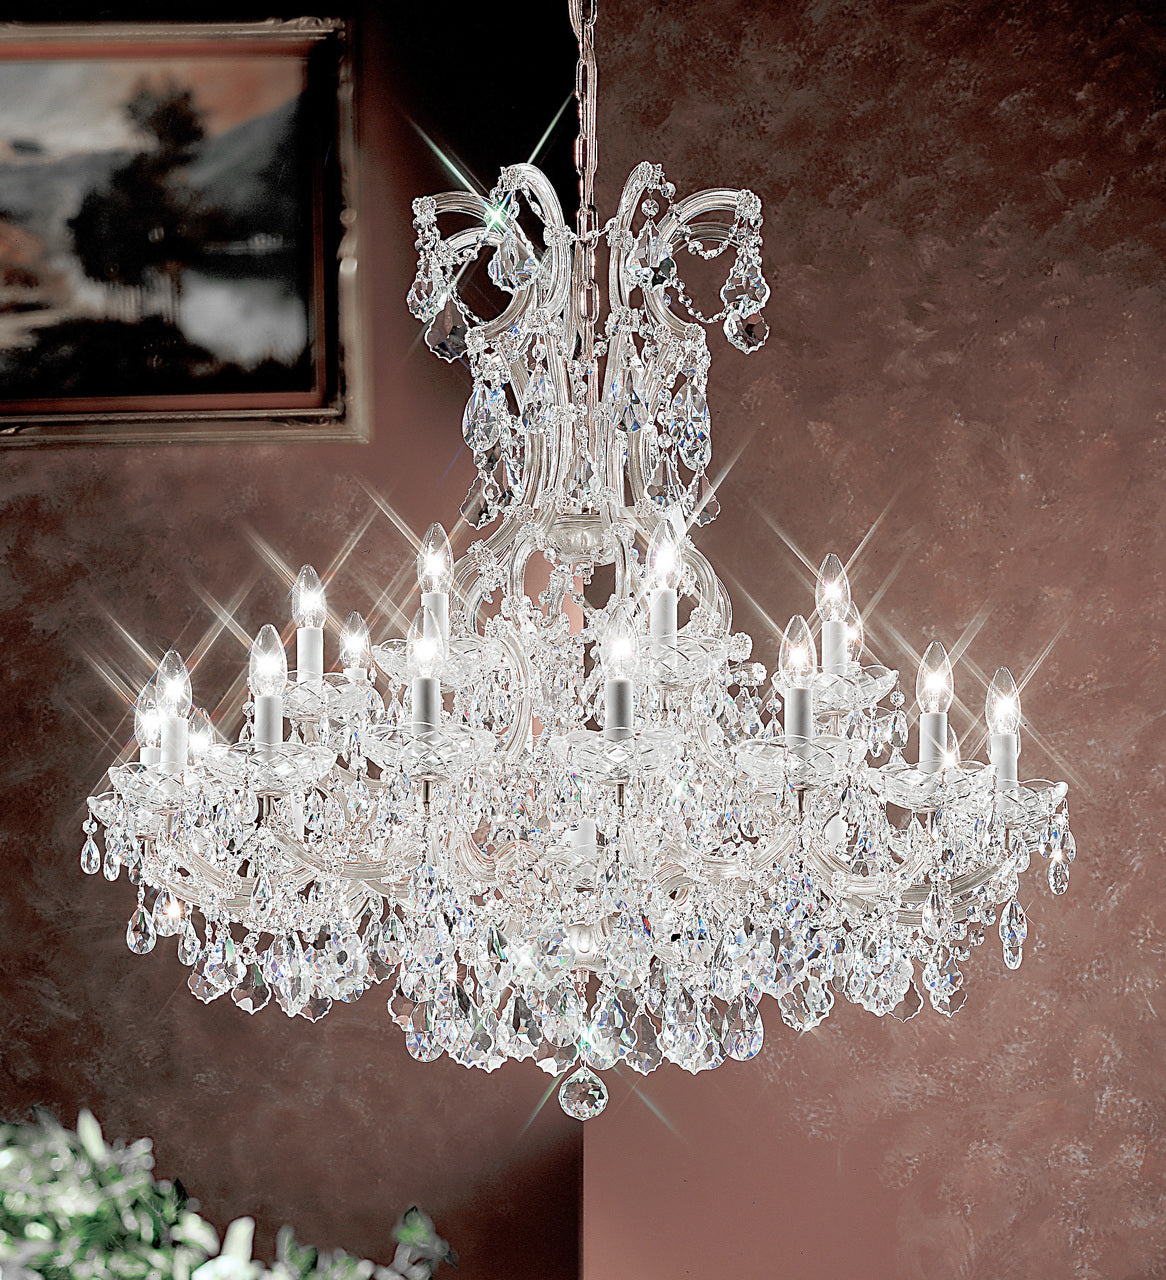 Classic Lighting 8159 CH C Maria Theresa Traditional Crystal Chandelier in Chrome (Imported from Italy)